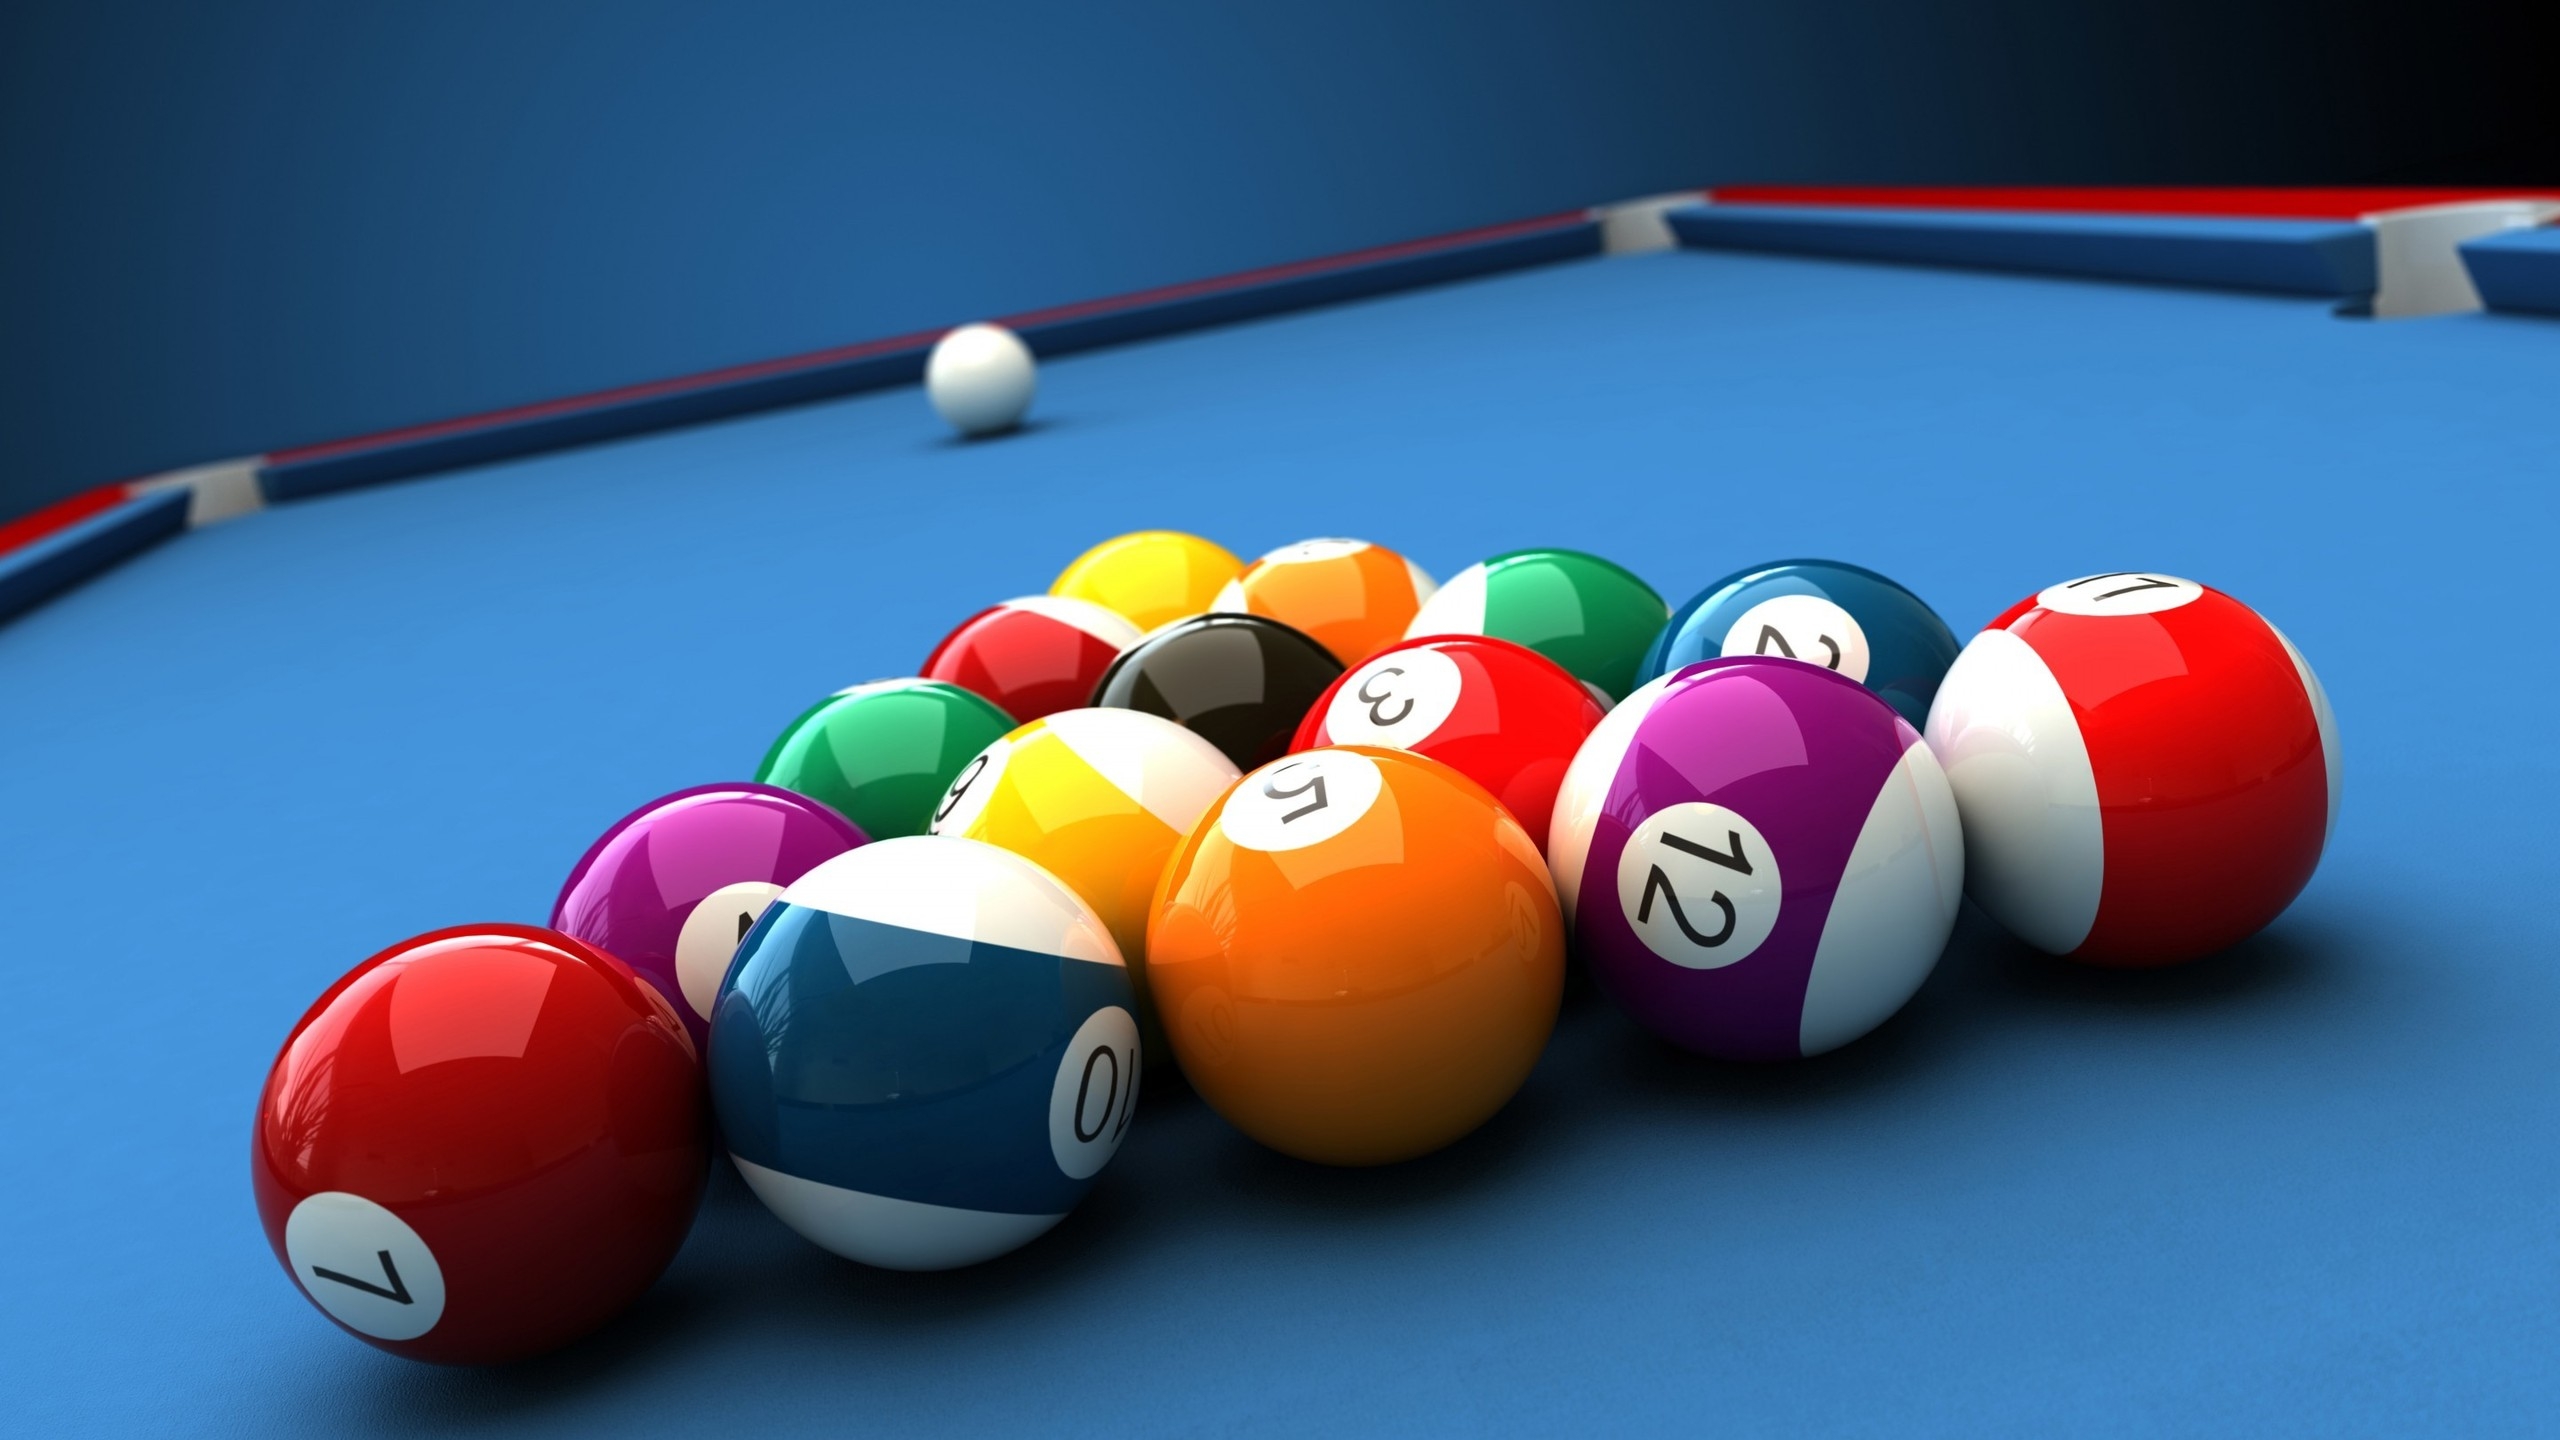 Billiards Table and Balls for 2560x1440 HDTV resolution